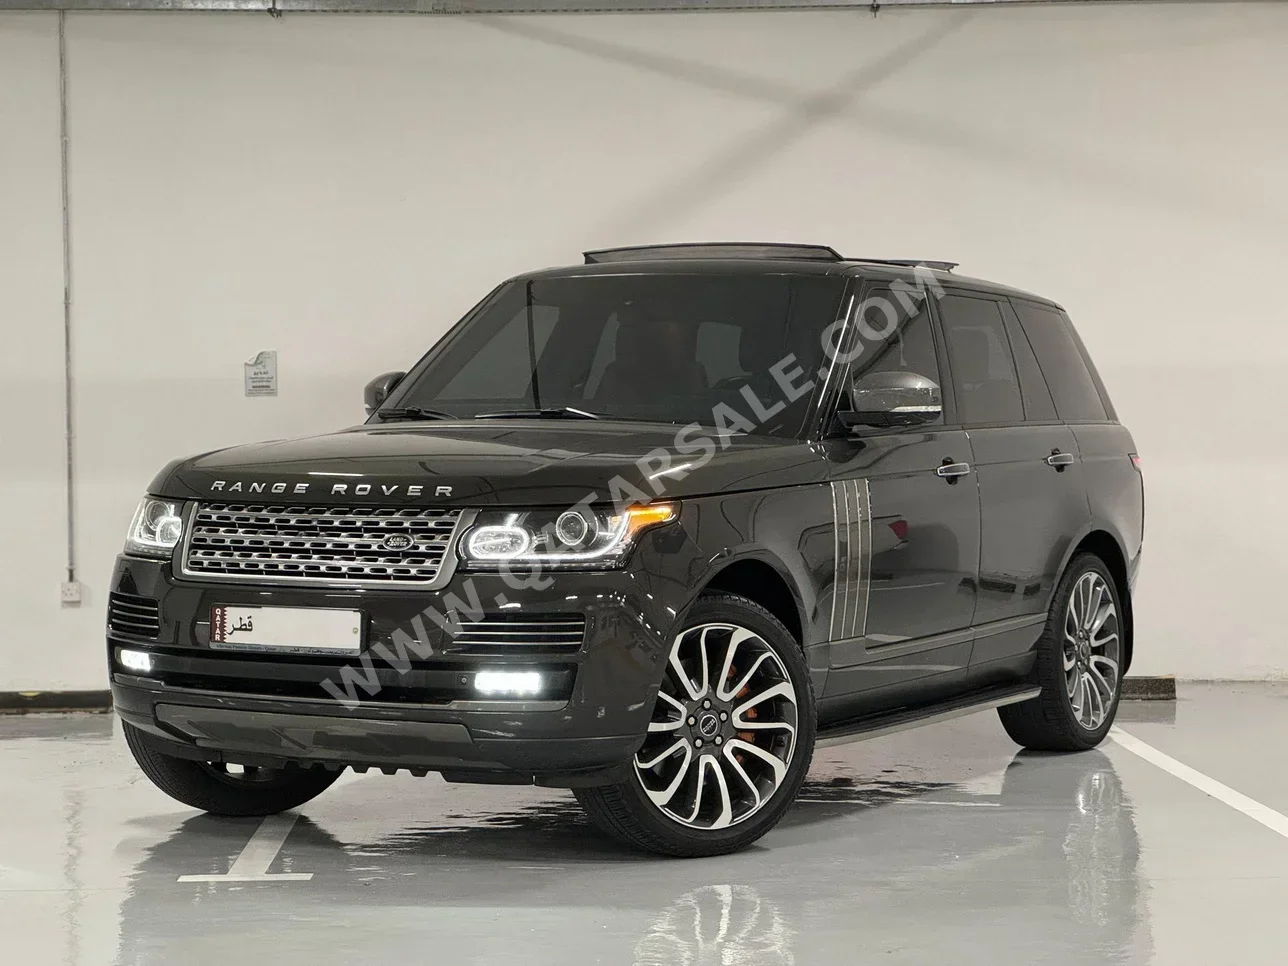 Land Rover  Range Rover  Vogue  Autobiography  2014  Automatic  112,000 Km  8 Cylinder  Four Wheel Drive (4WD)  SUV  Gray